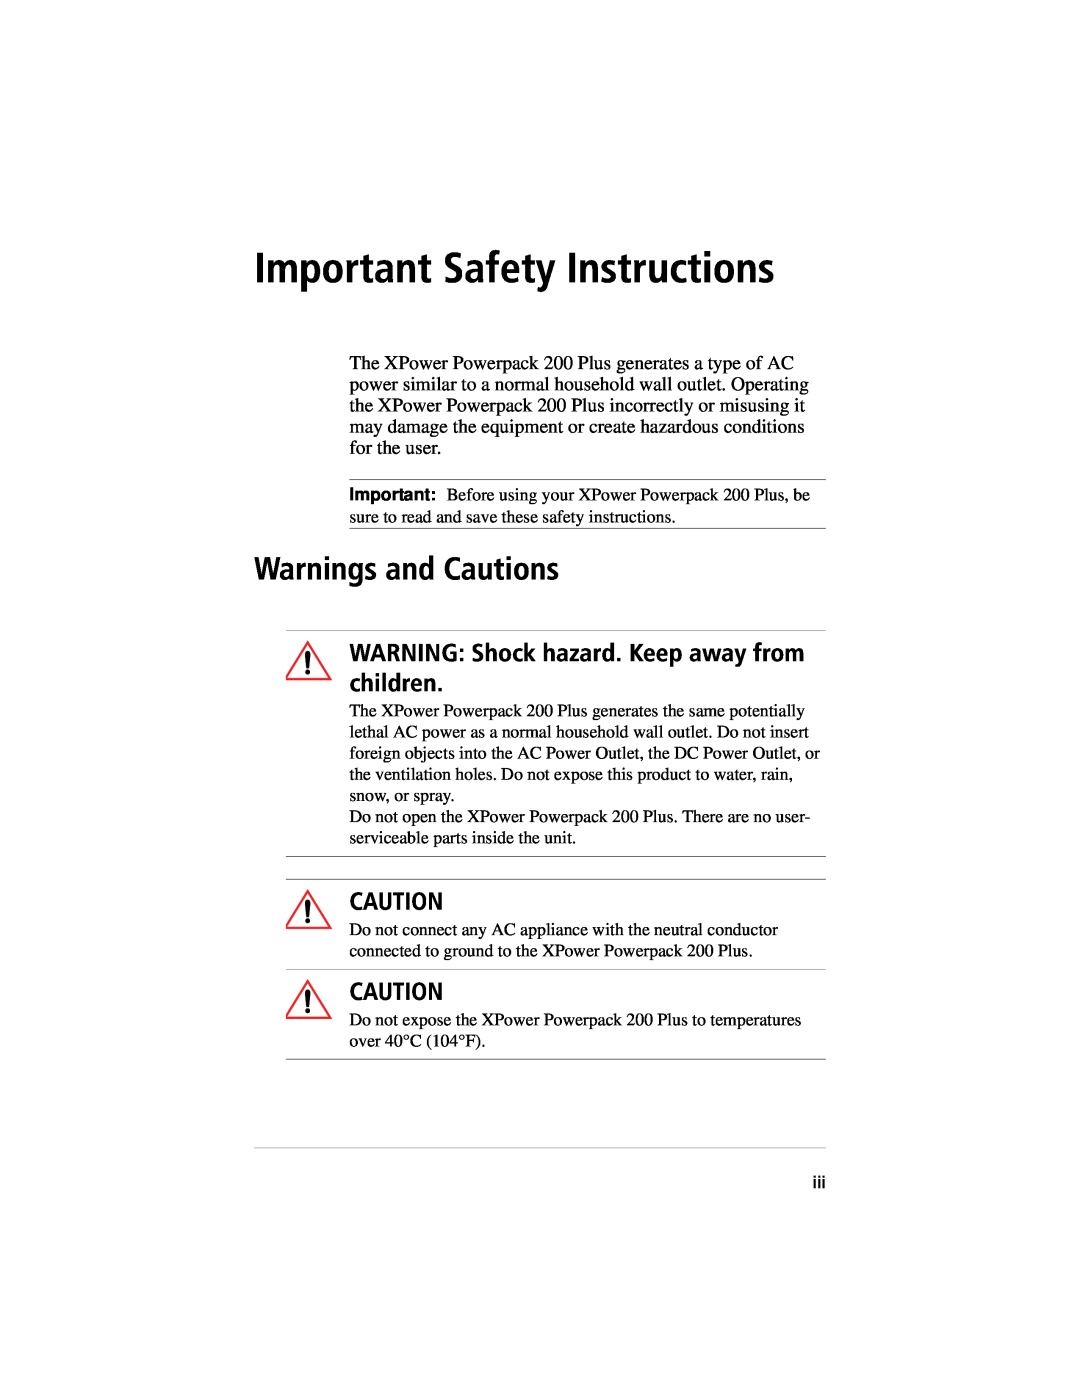 Xantrex Technology 400 Important Safety Instructions, Warnings and Cautions, WARNING Shock hazard. Keep away from children 